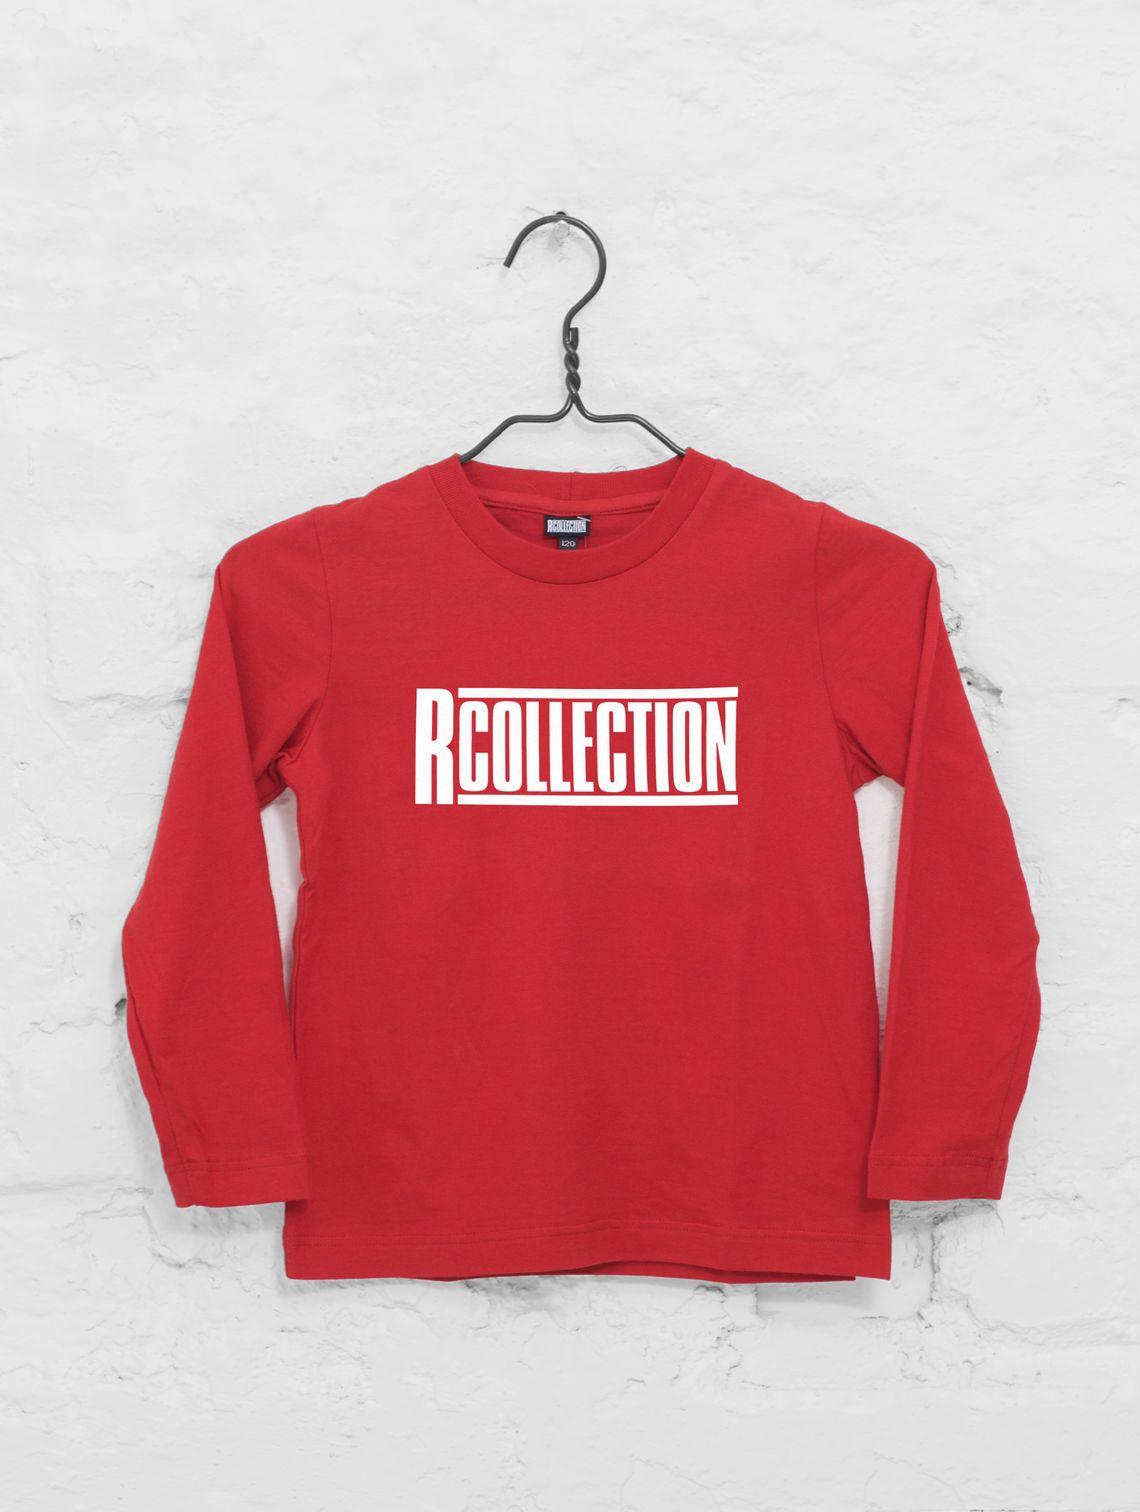 Red with White R Logo - Children's Long-Sleeved T-Shirt red / white logo | R-Collection